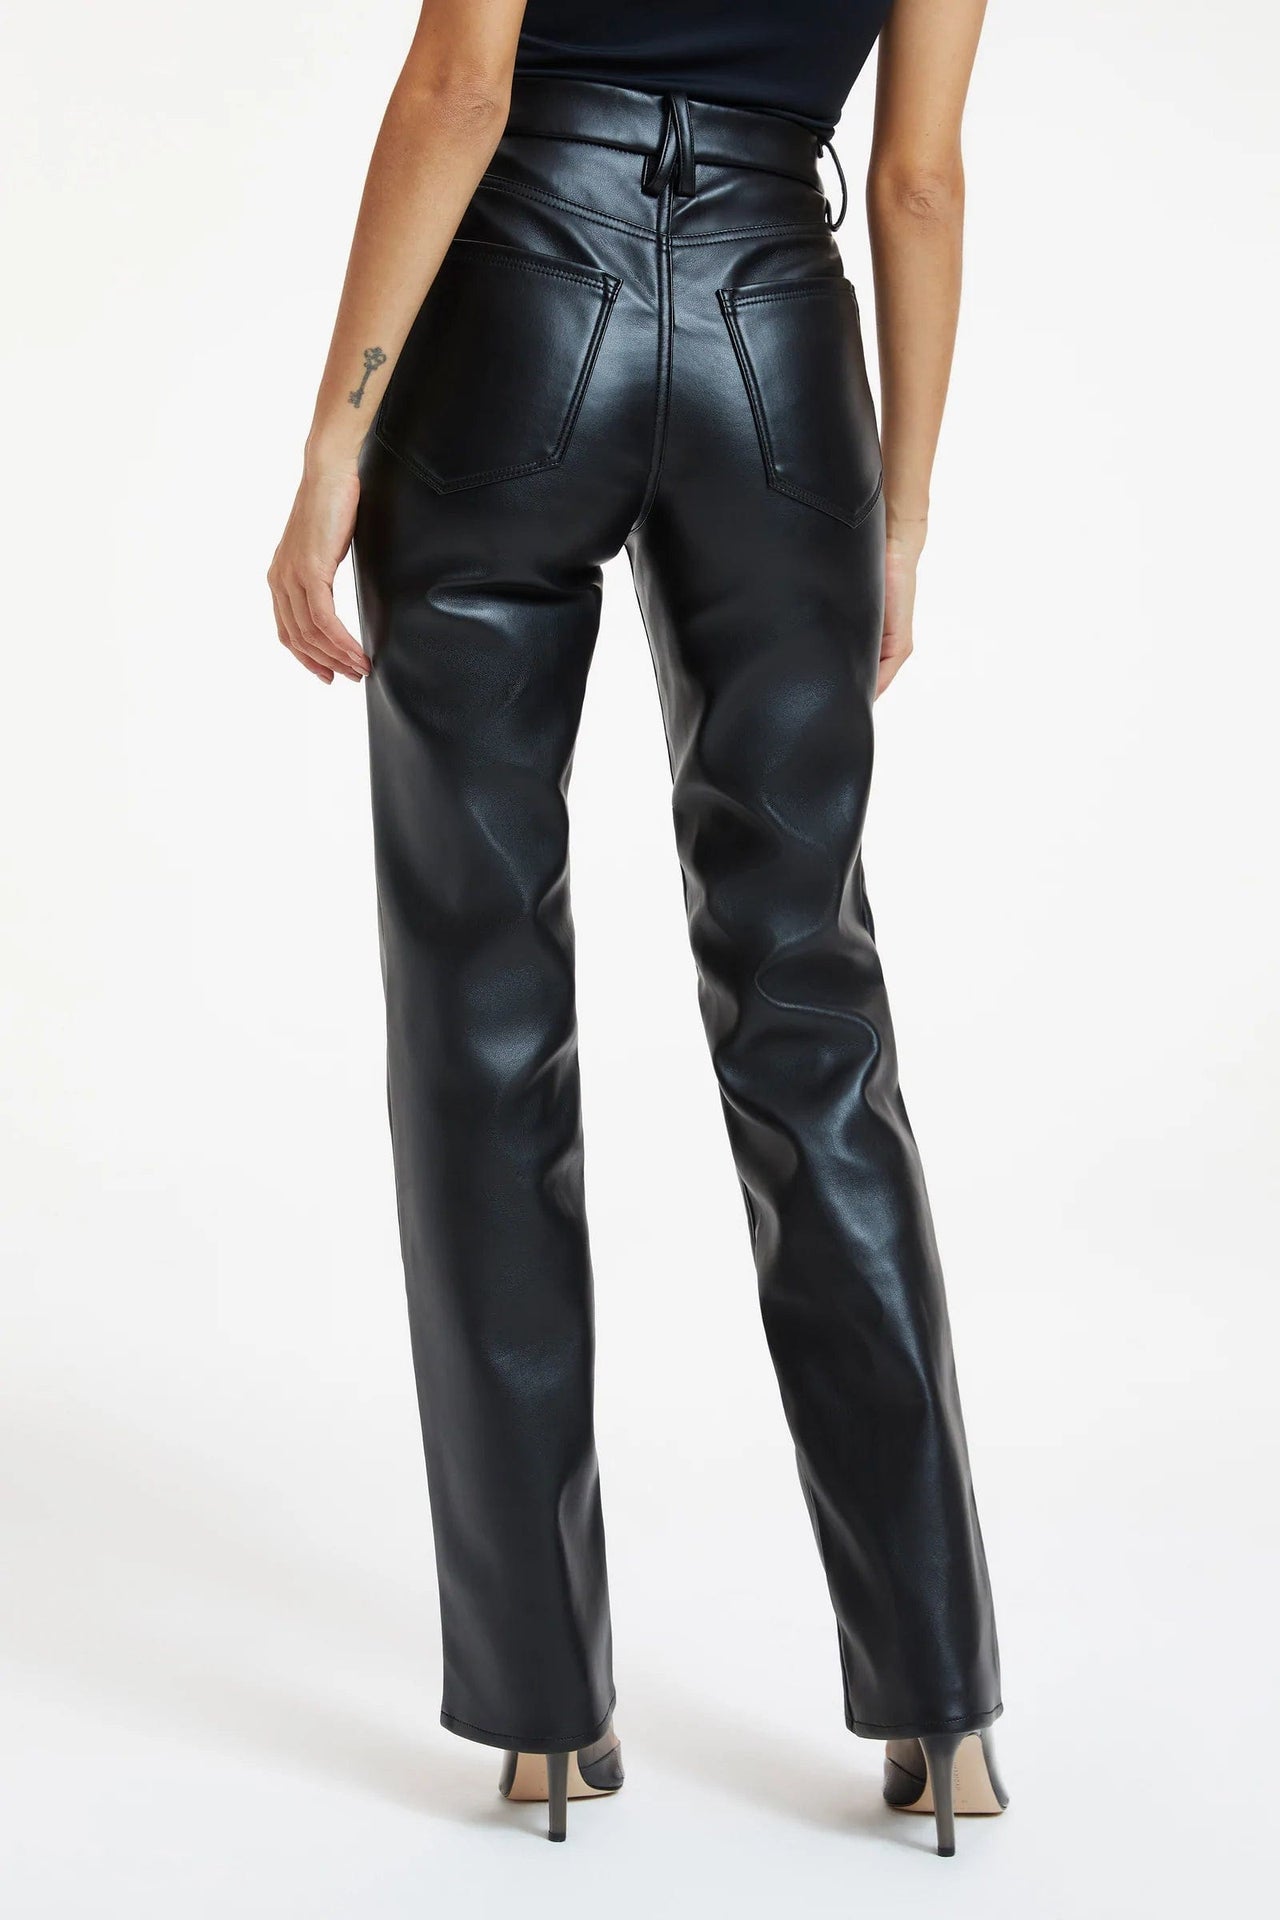 Better Than Leather Good Icon Black, Bottoms by Good American | LIT Boutique